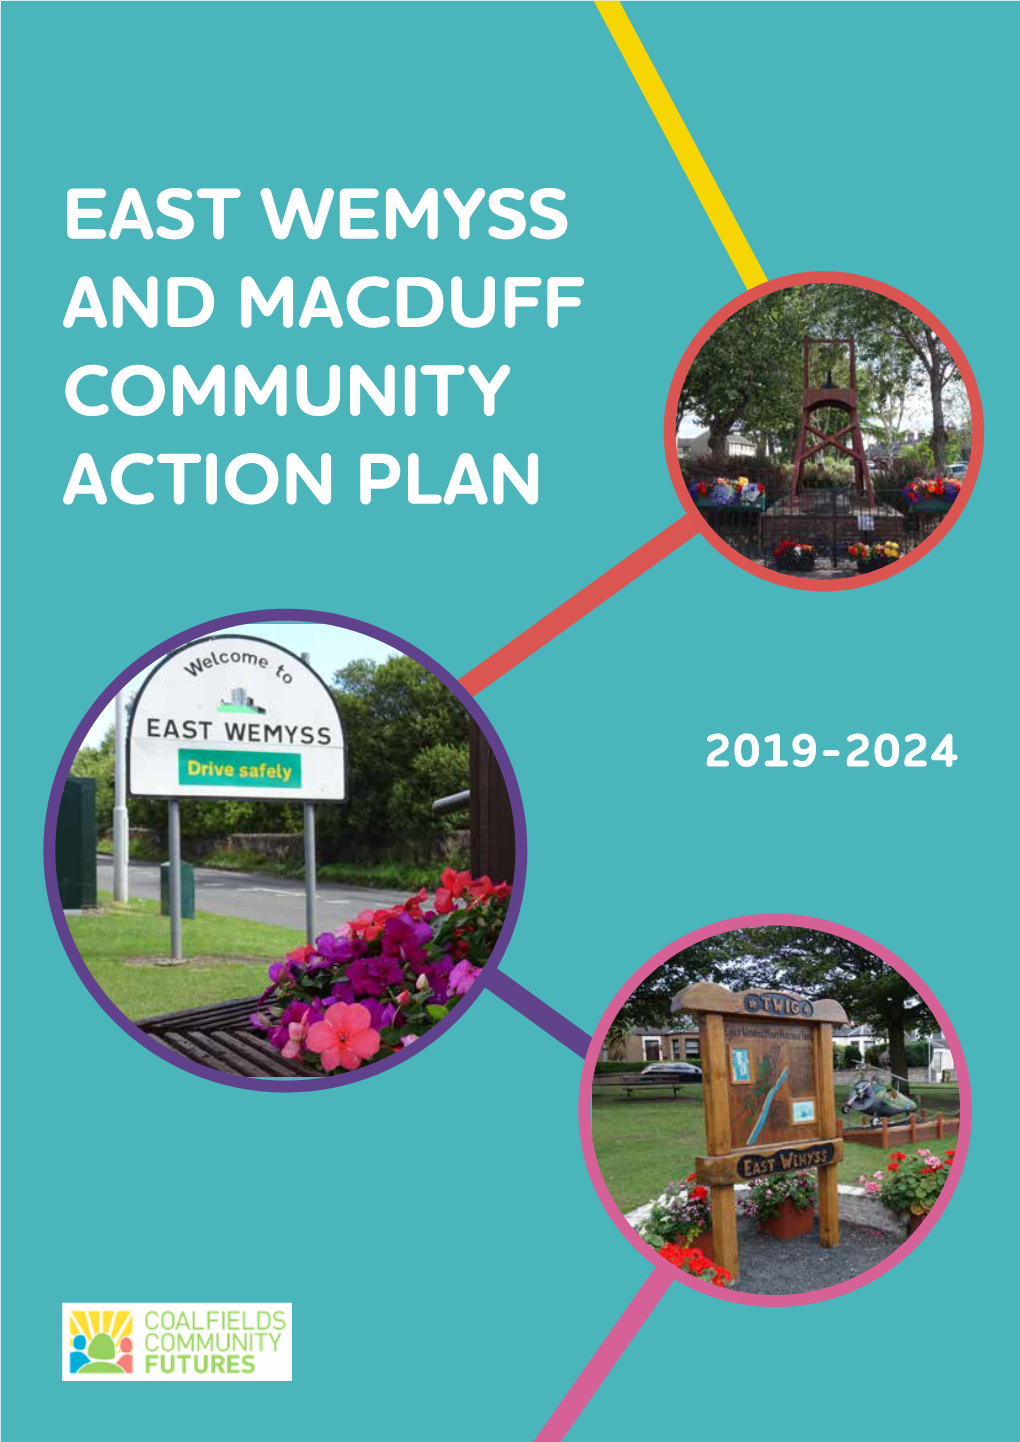 East Wemyss and Macduff Community Action Plan 2019 to 2024 Page 01